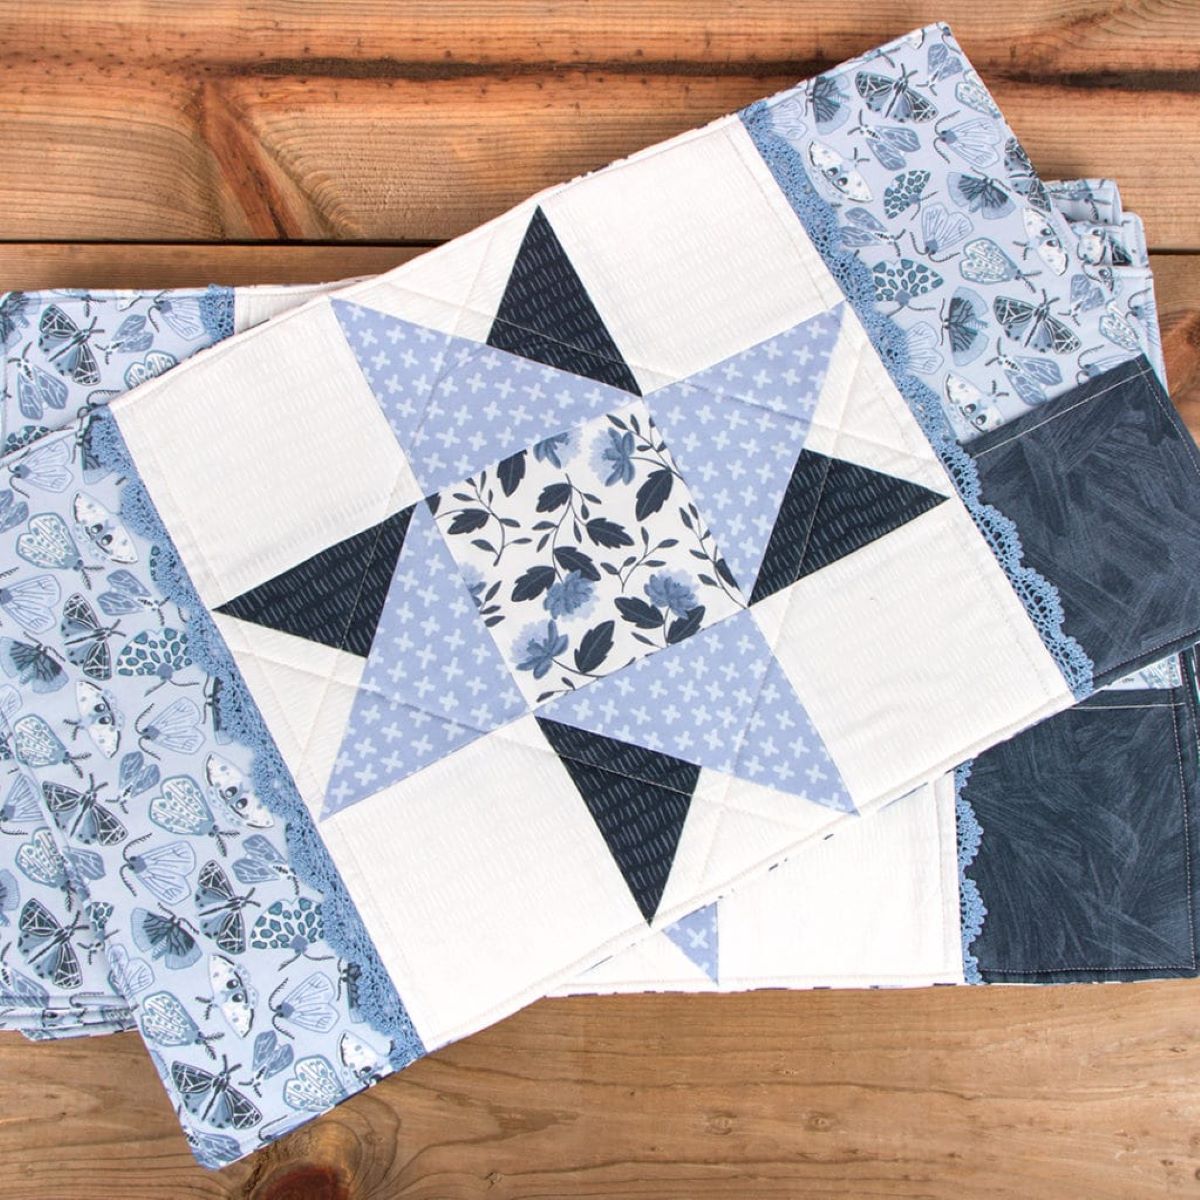 How To Quilt Placemats